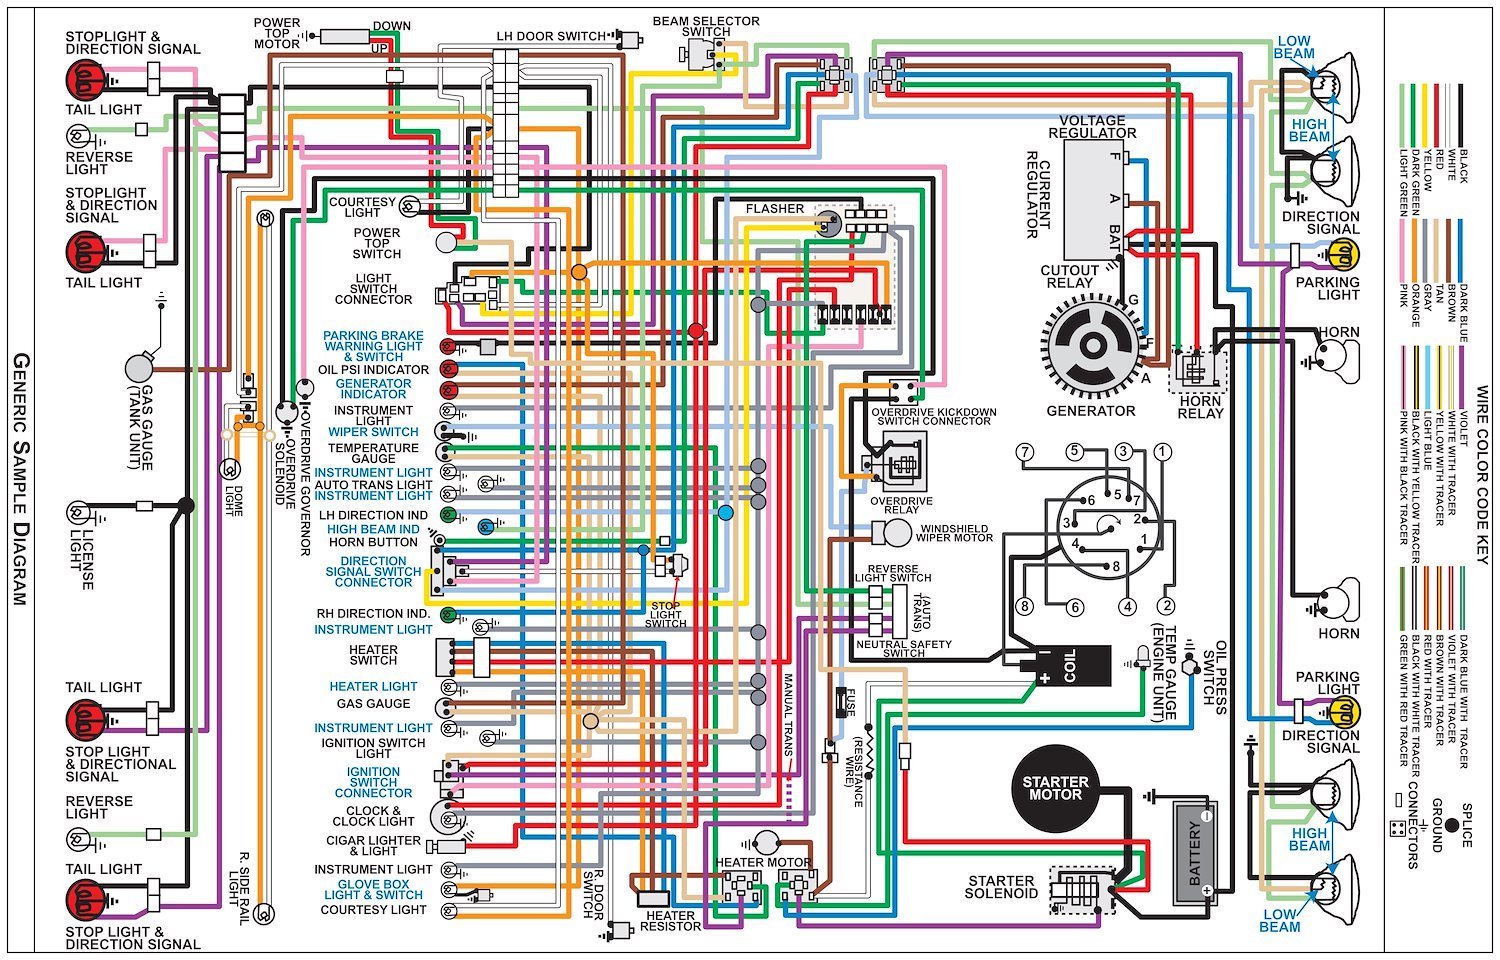 Wiring Diagram for 1975 Dodge D, W Series Trucks, 11 in x 17 in., Laminated